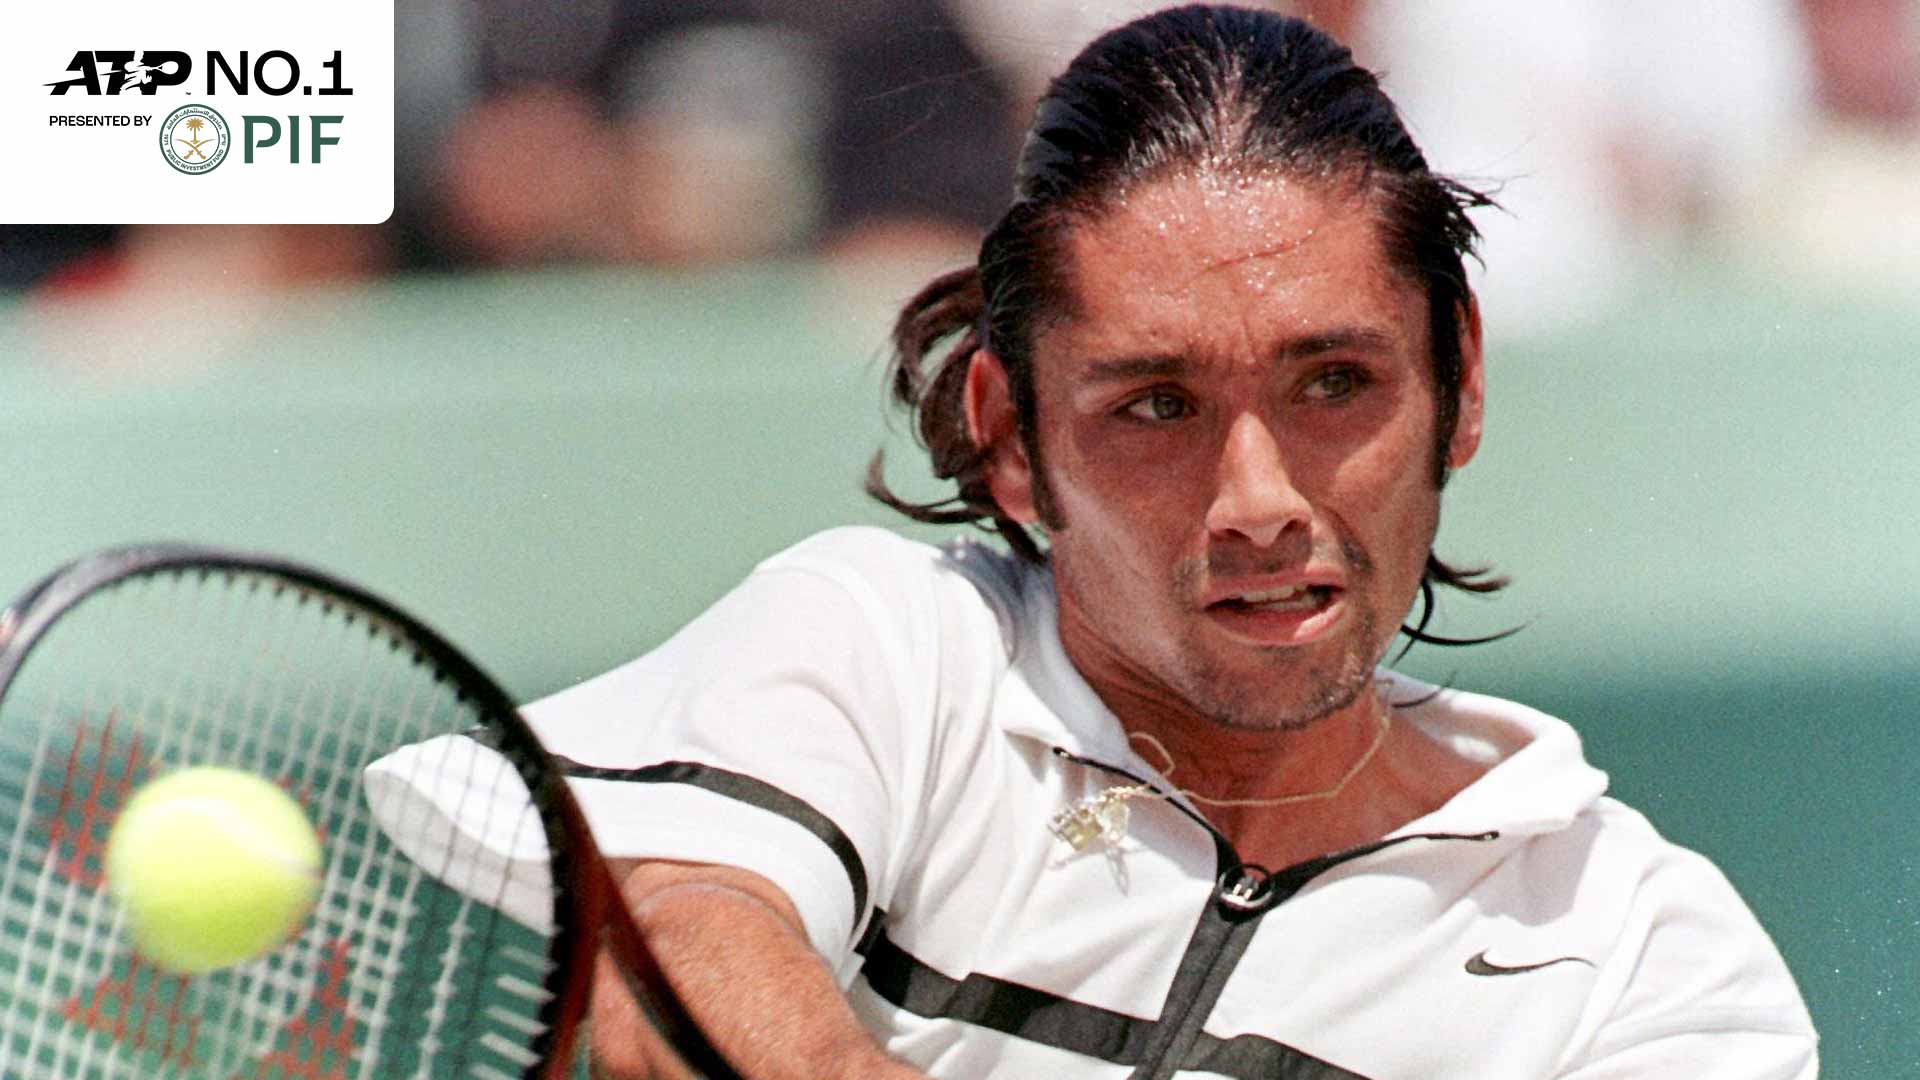 Marcelo Rios won the ATP Masters 1000 event in Miami in 1998 to rise to World No. 1 in the PIF ATP Rankings.